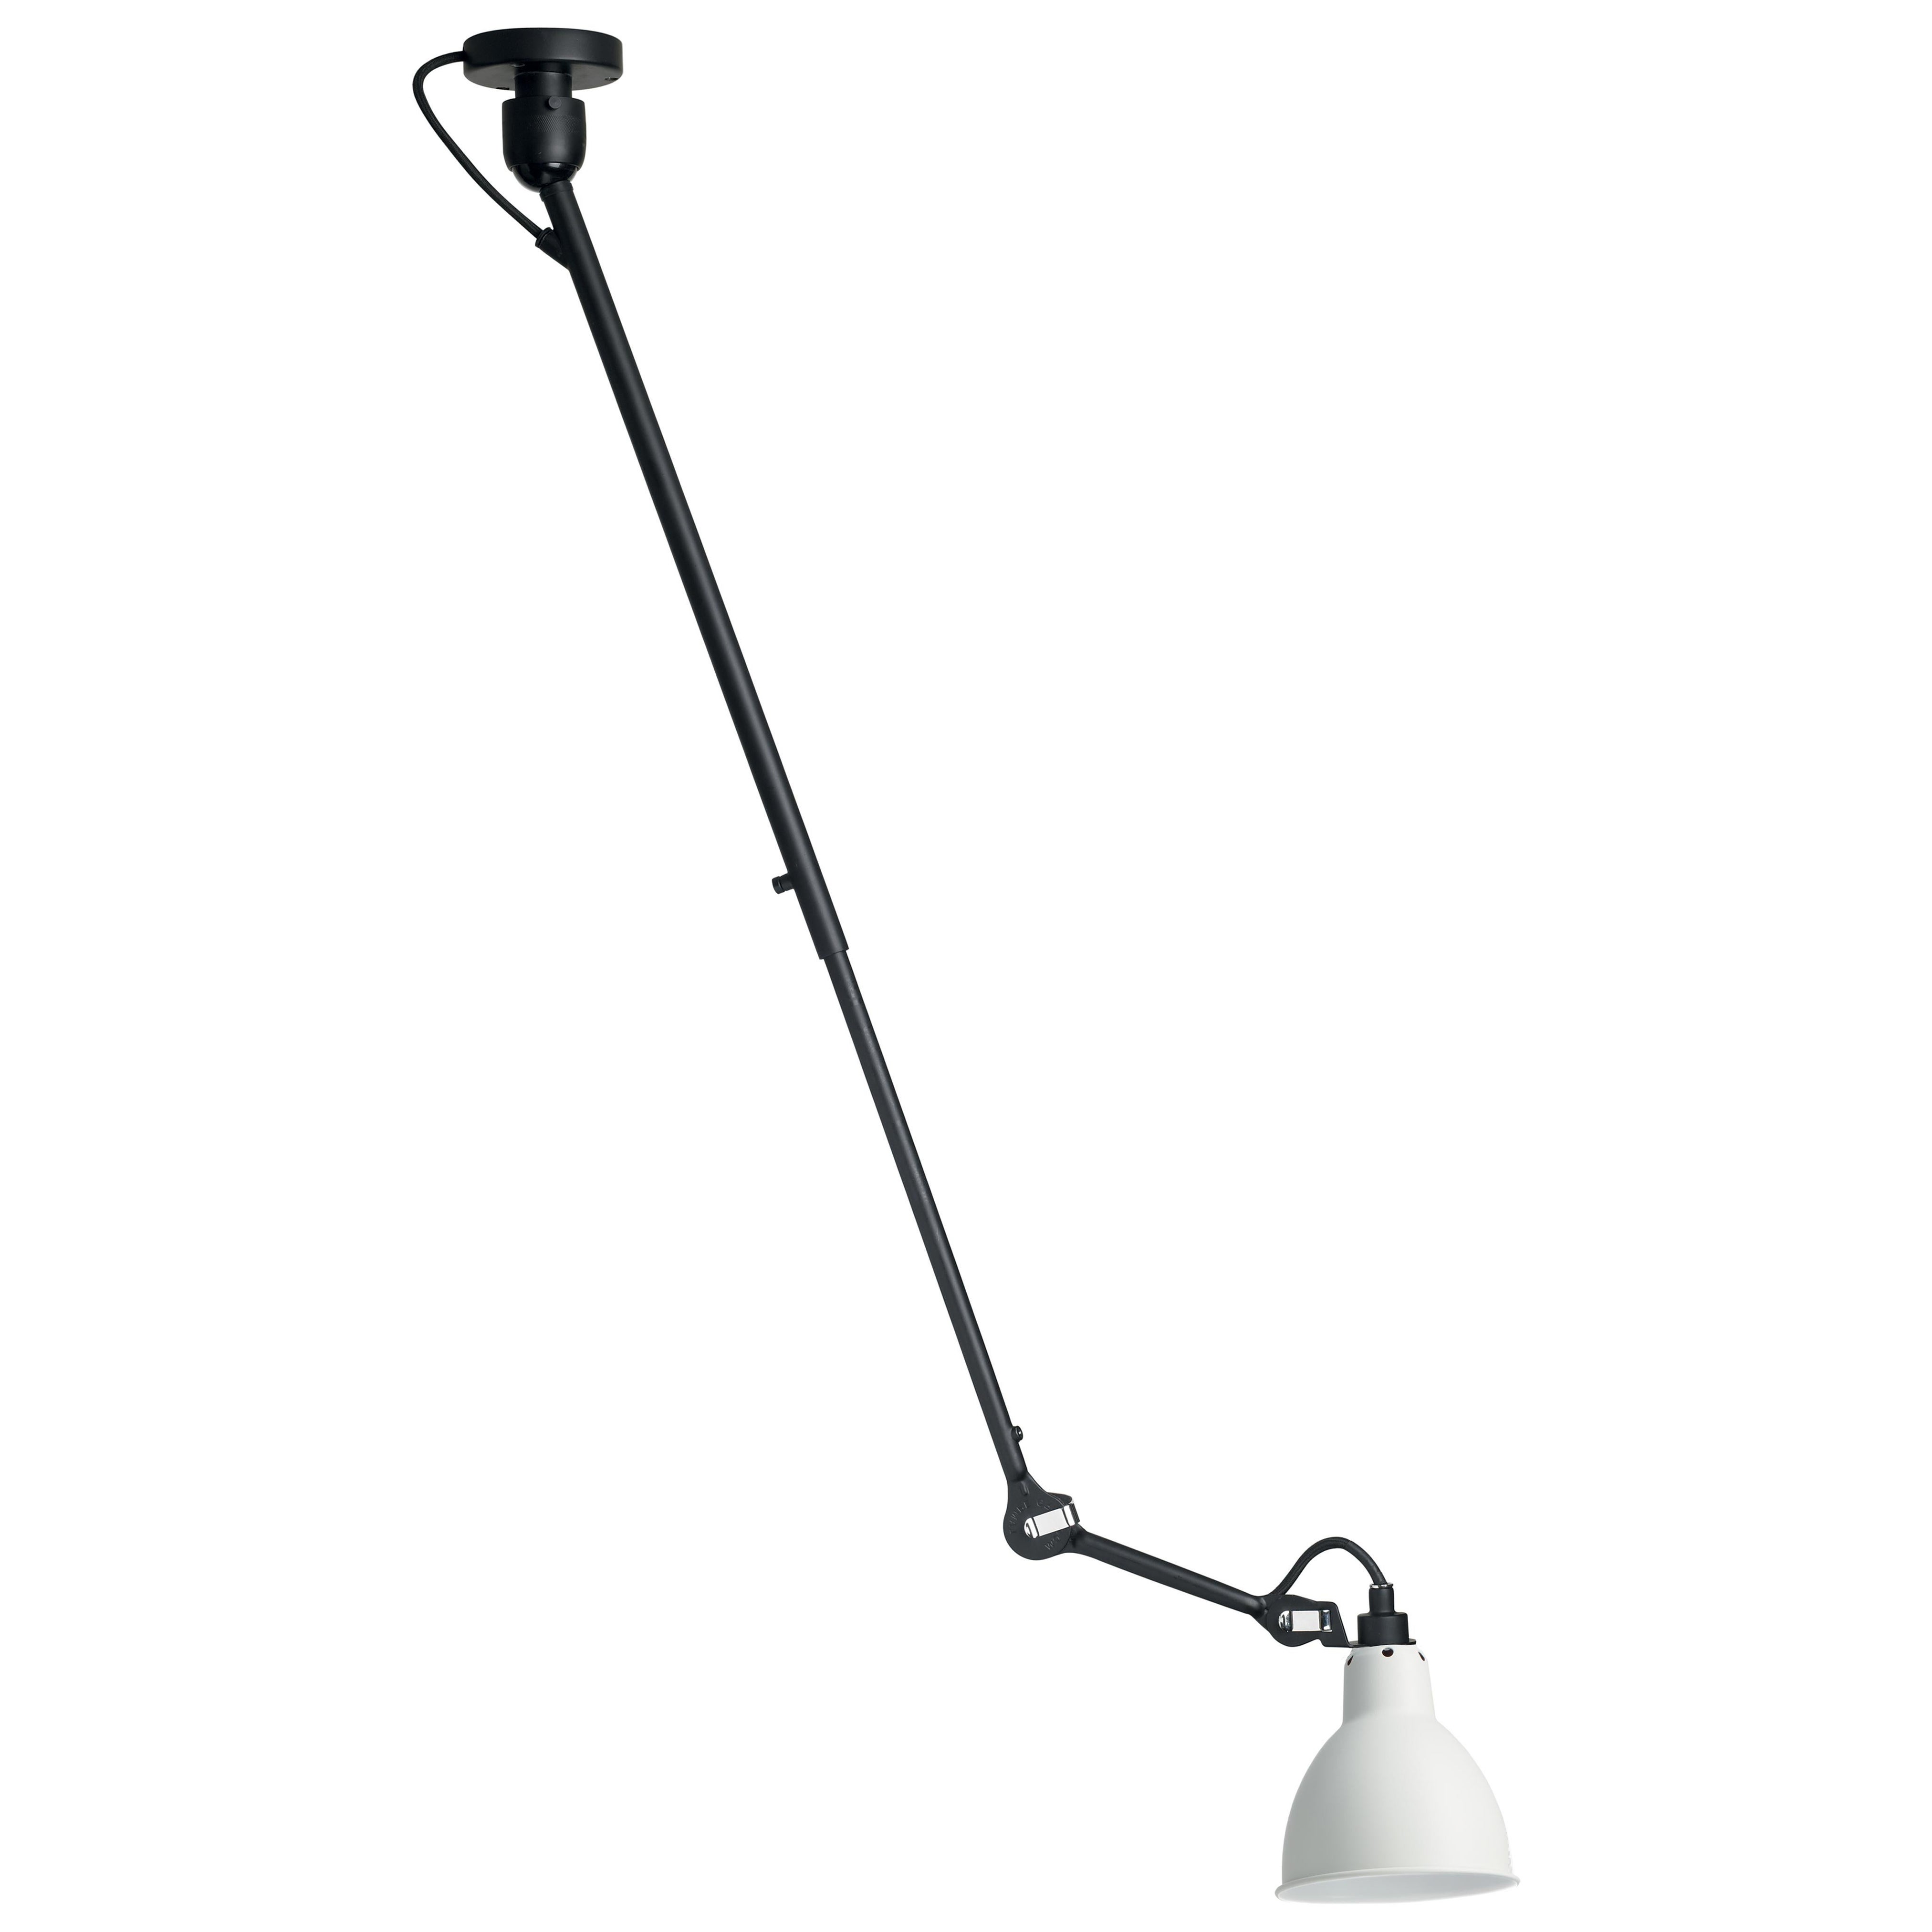 DCW Editions La Lampe Gras N°302 Pendant Light in Black Arm and White Shade